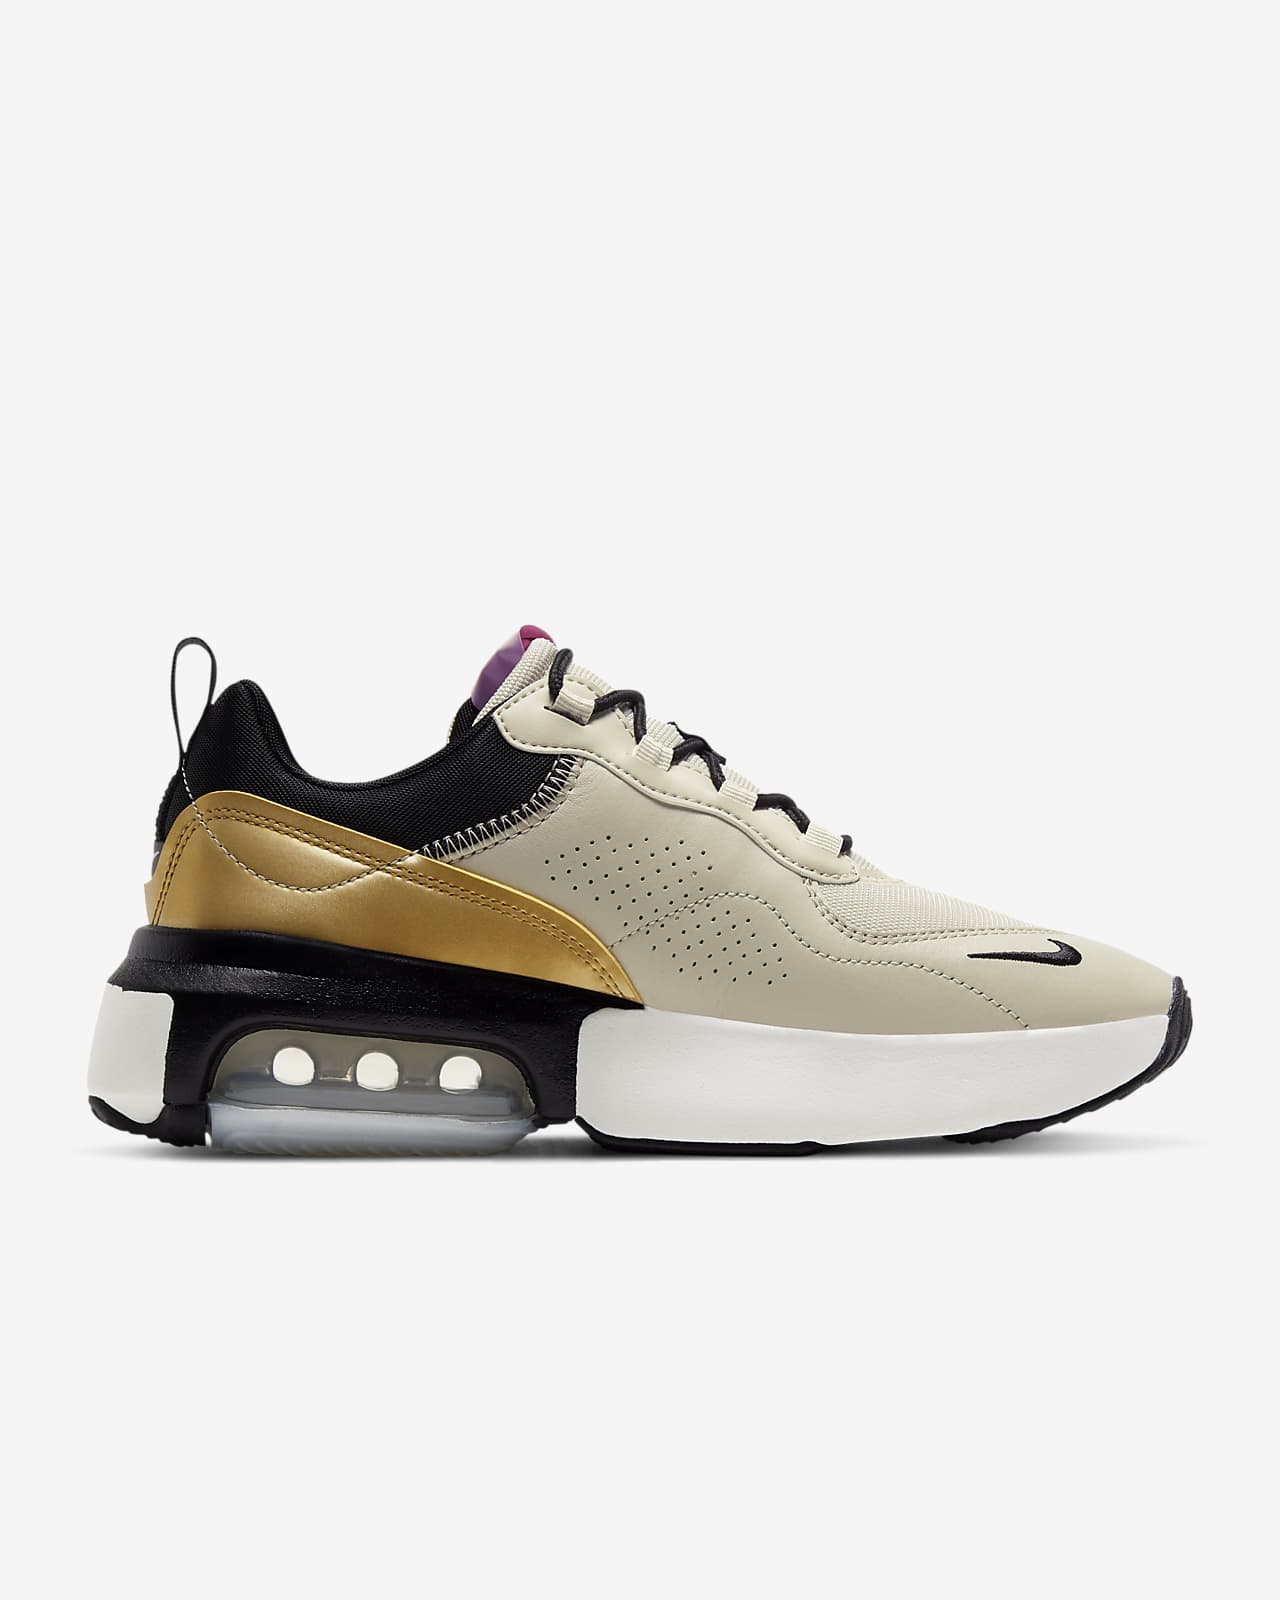 nike black and gold shoes air max